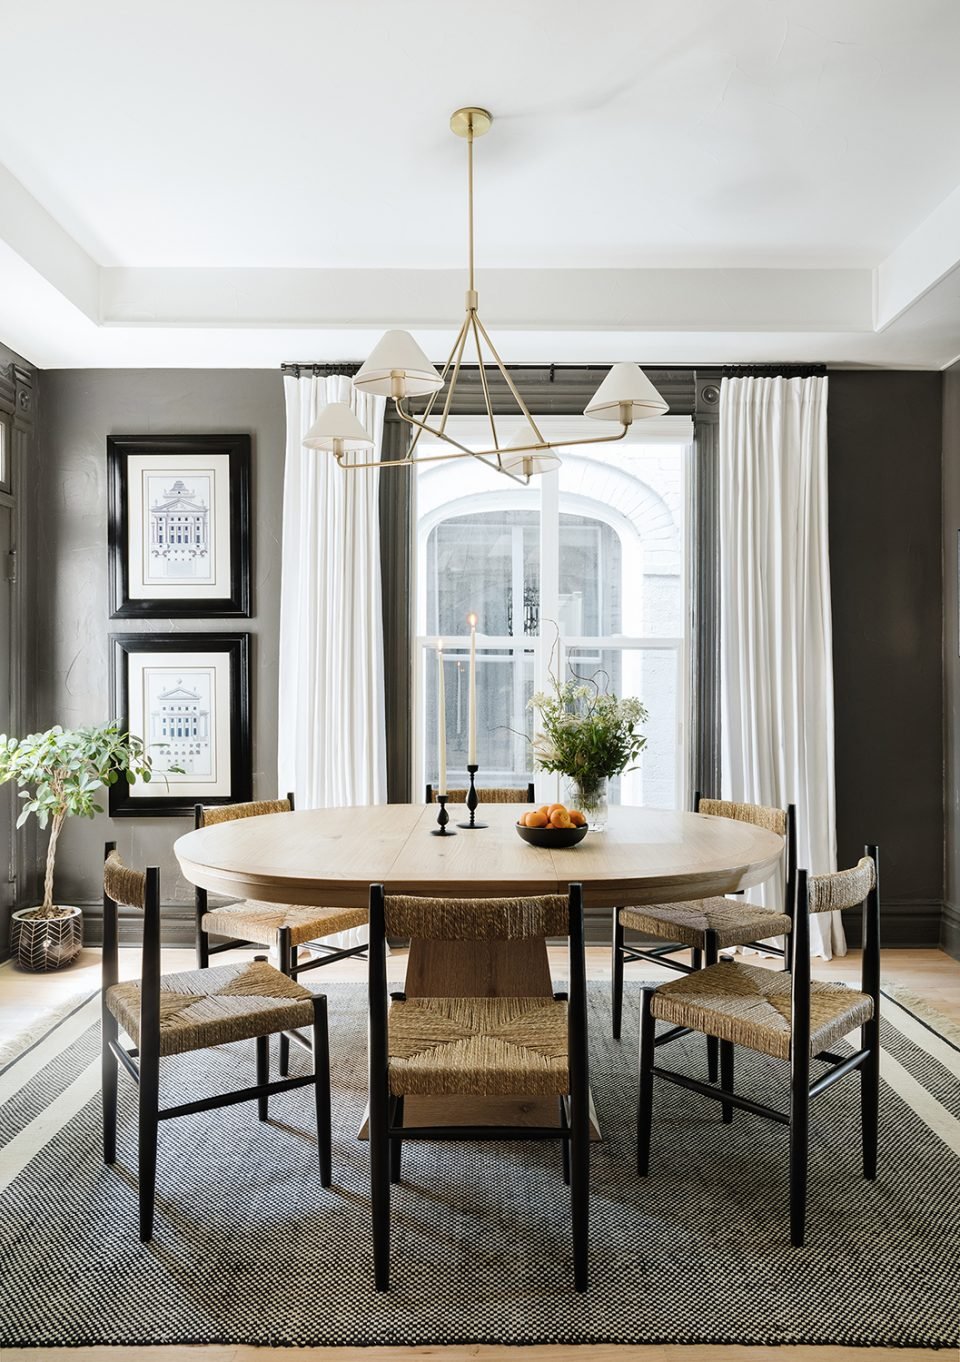 Dining Room Ideas 2022: 9 Before & After Reveals We Love | Havenly ...